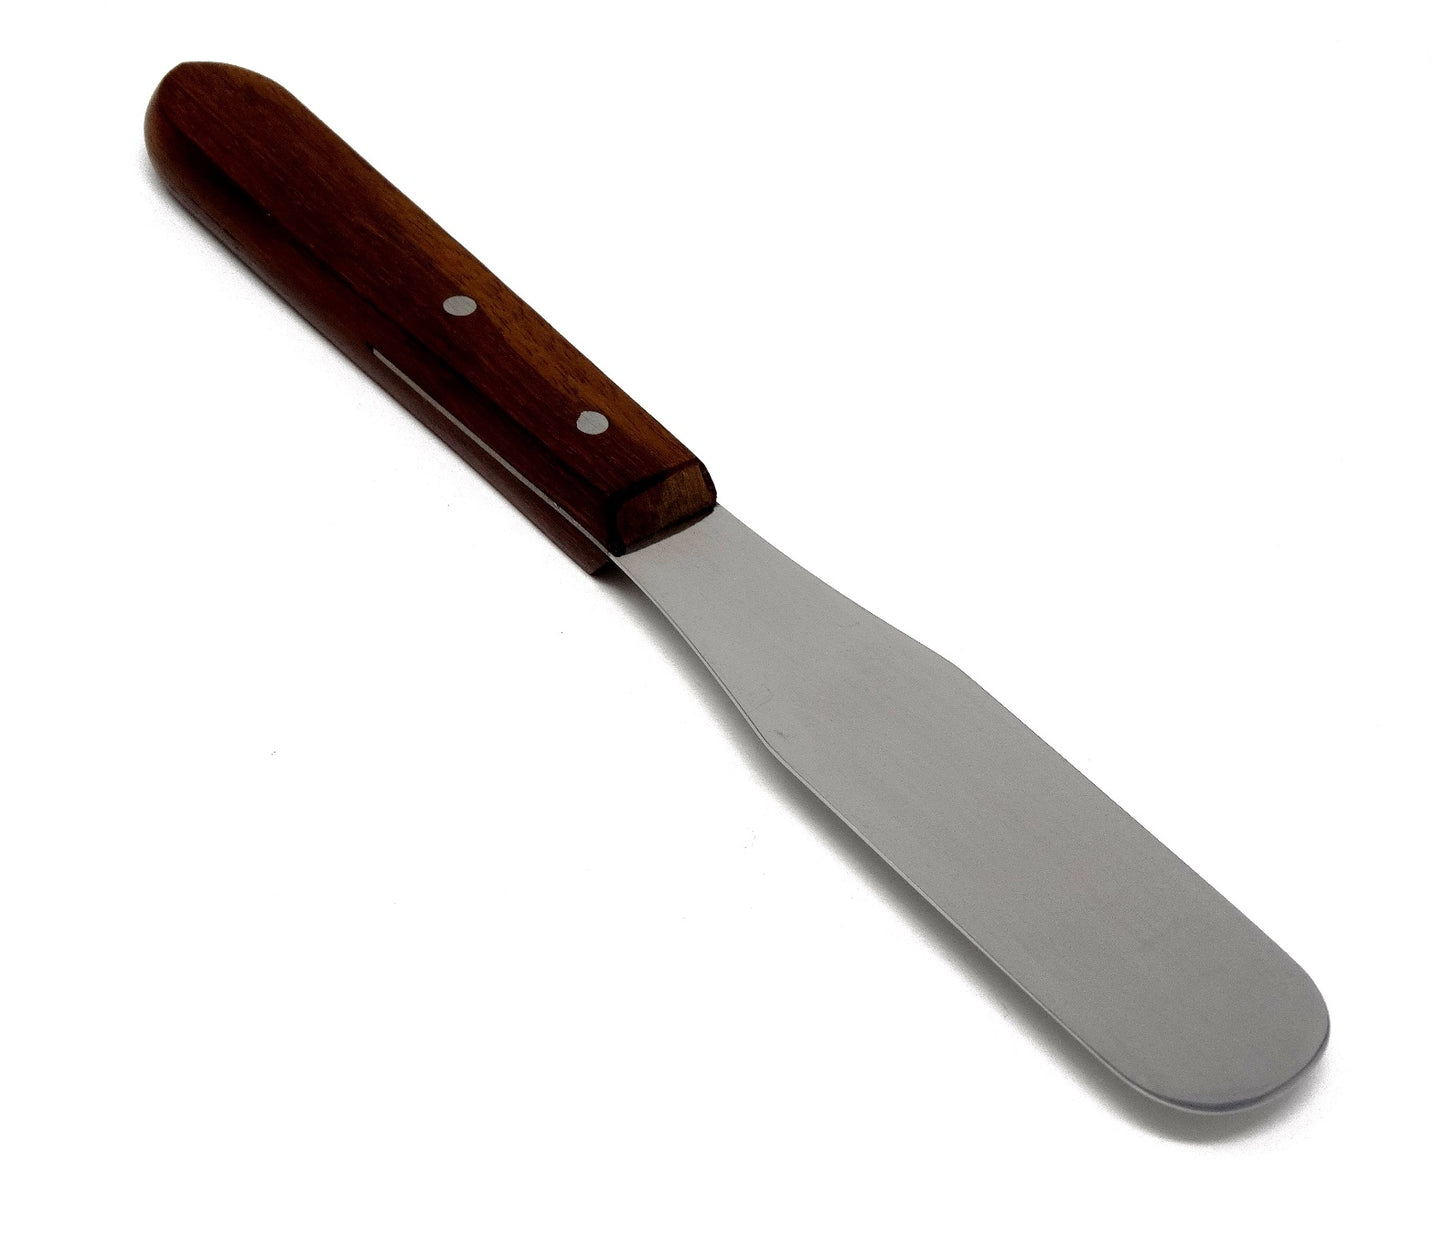 IMS-WHS3 Stainless Steel Lab Spatula with Wooden Handle, 3" Blade, 0.62" Blade Width, 7" Total Length